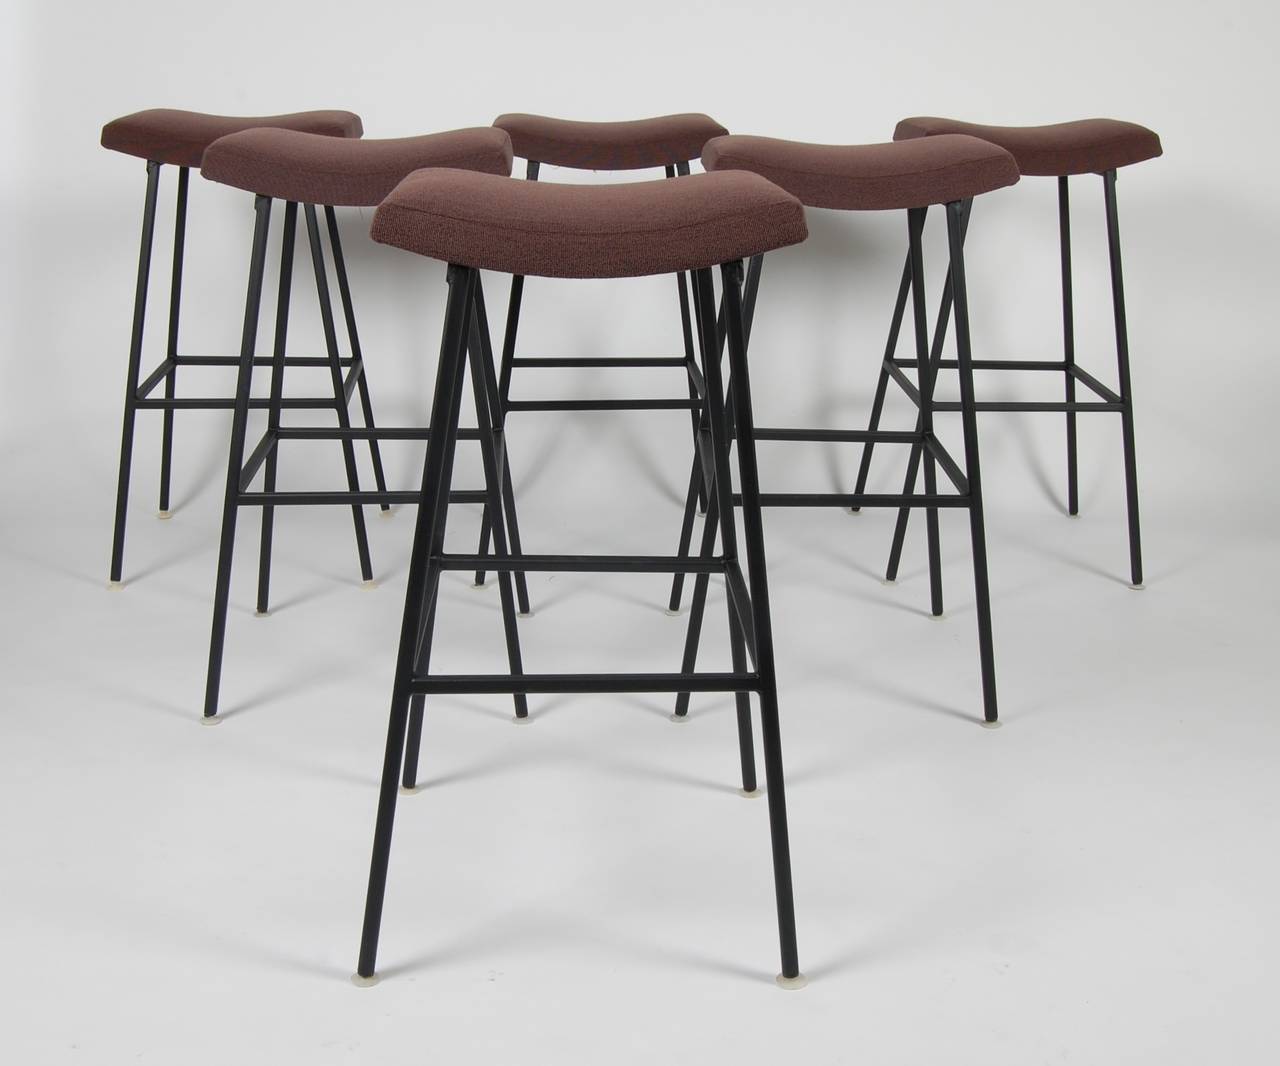 Six bar stools by Thinline of California, new upholstered curved seats, square tube iron frames with foot rests on all four side and newly enameled a flat black. Each stool has self adjusting glides.